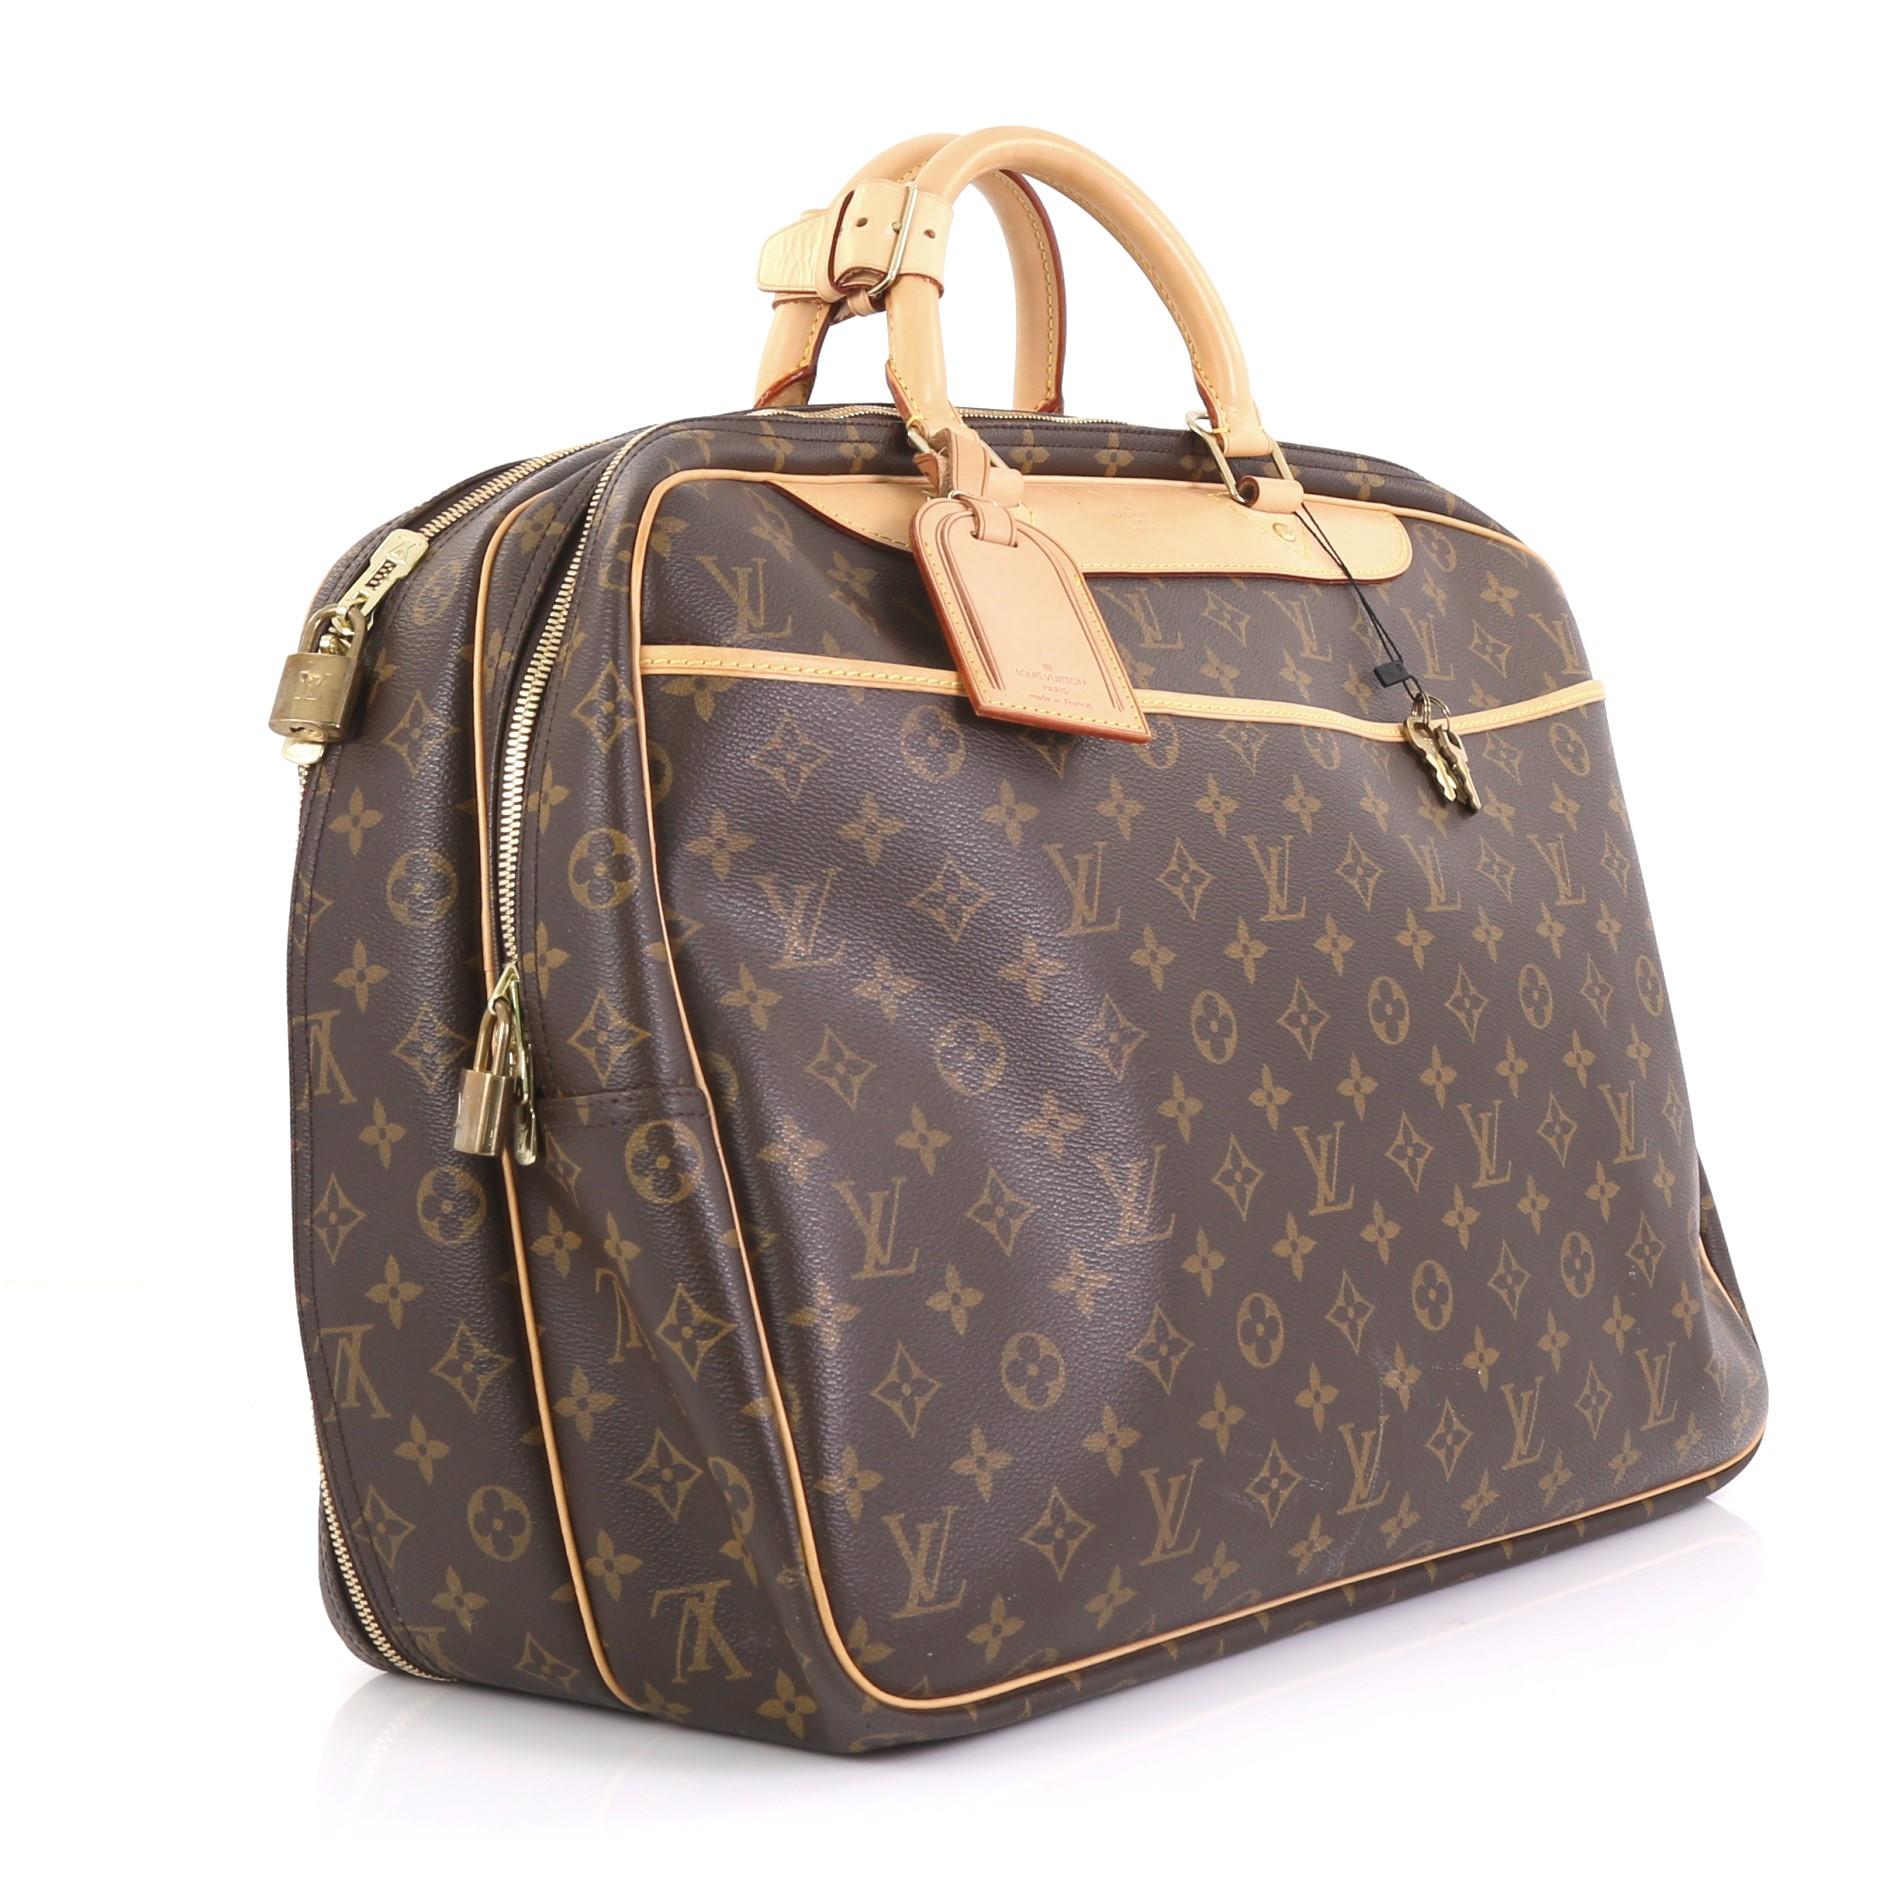 This Louis Vuitton Alize Bag Monogram Canvas 24 Heures, crafted from brown monogram coated canvas, features dual rolled leather handles, exterior front slip pocket, and gold-tone hardware. Its two-way zip closure opens to a beige canvas interior